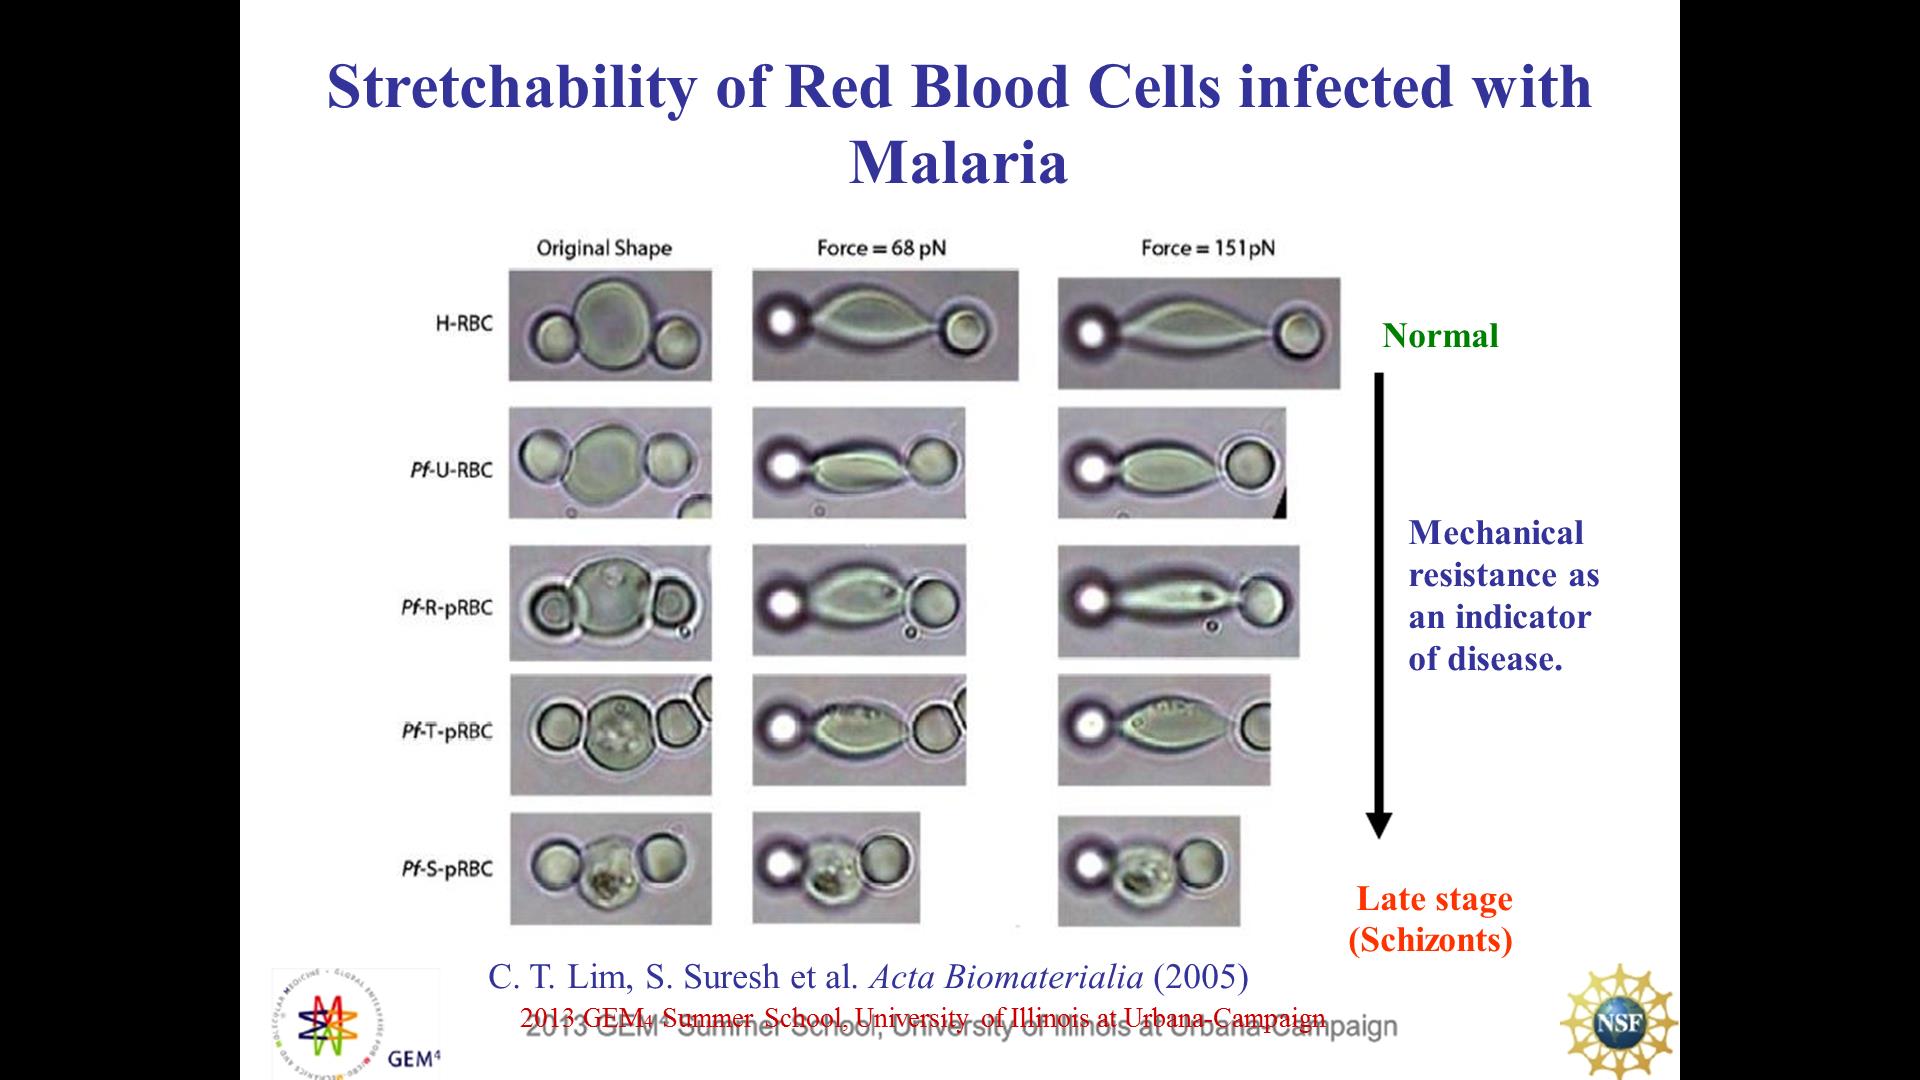 Stretchability of Red Blood Cells infected with Malaria